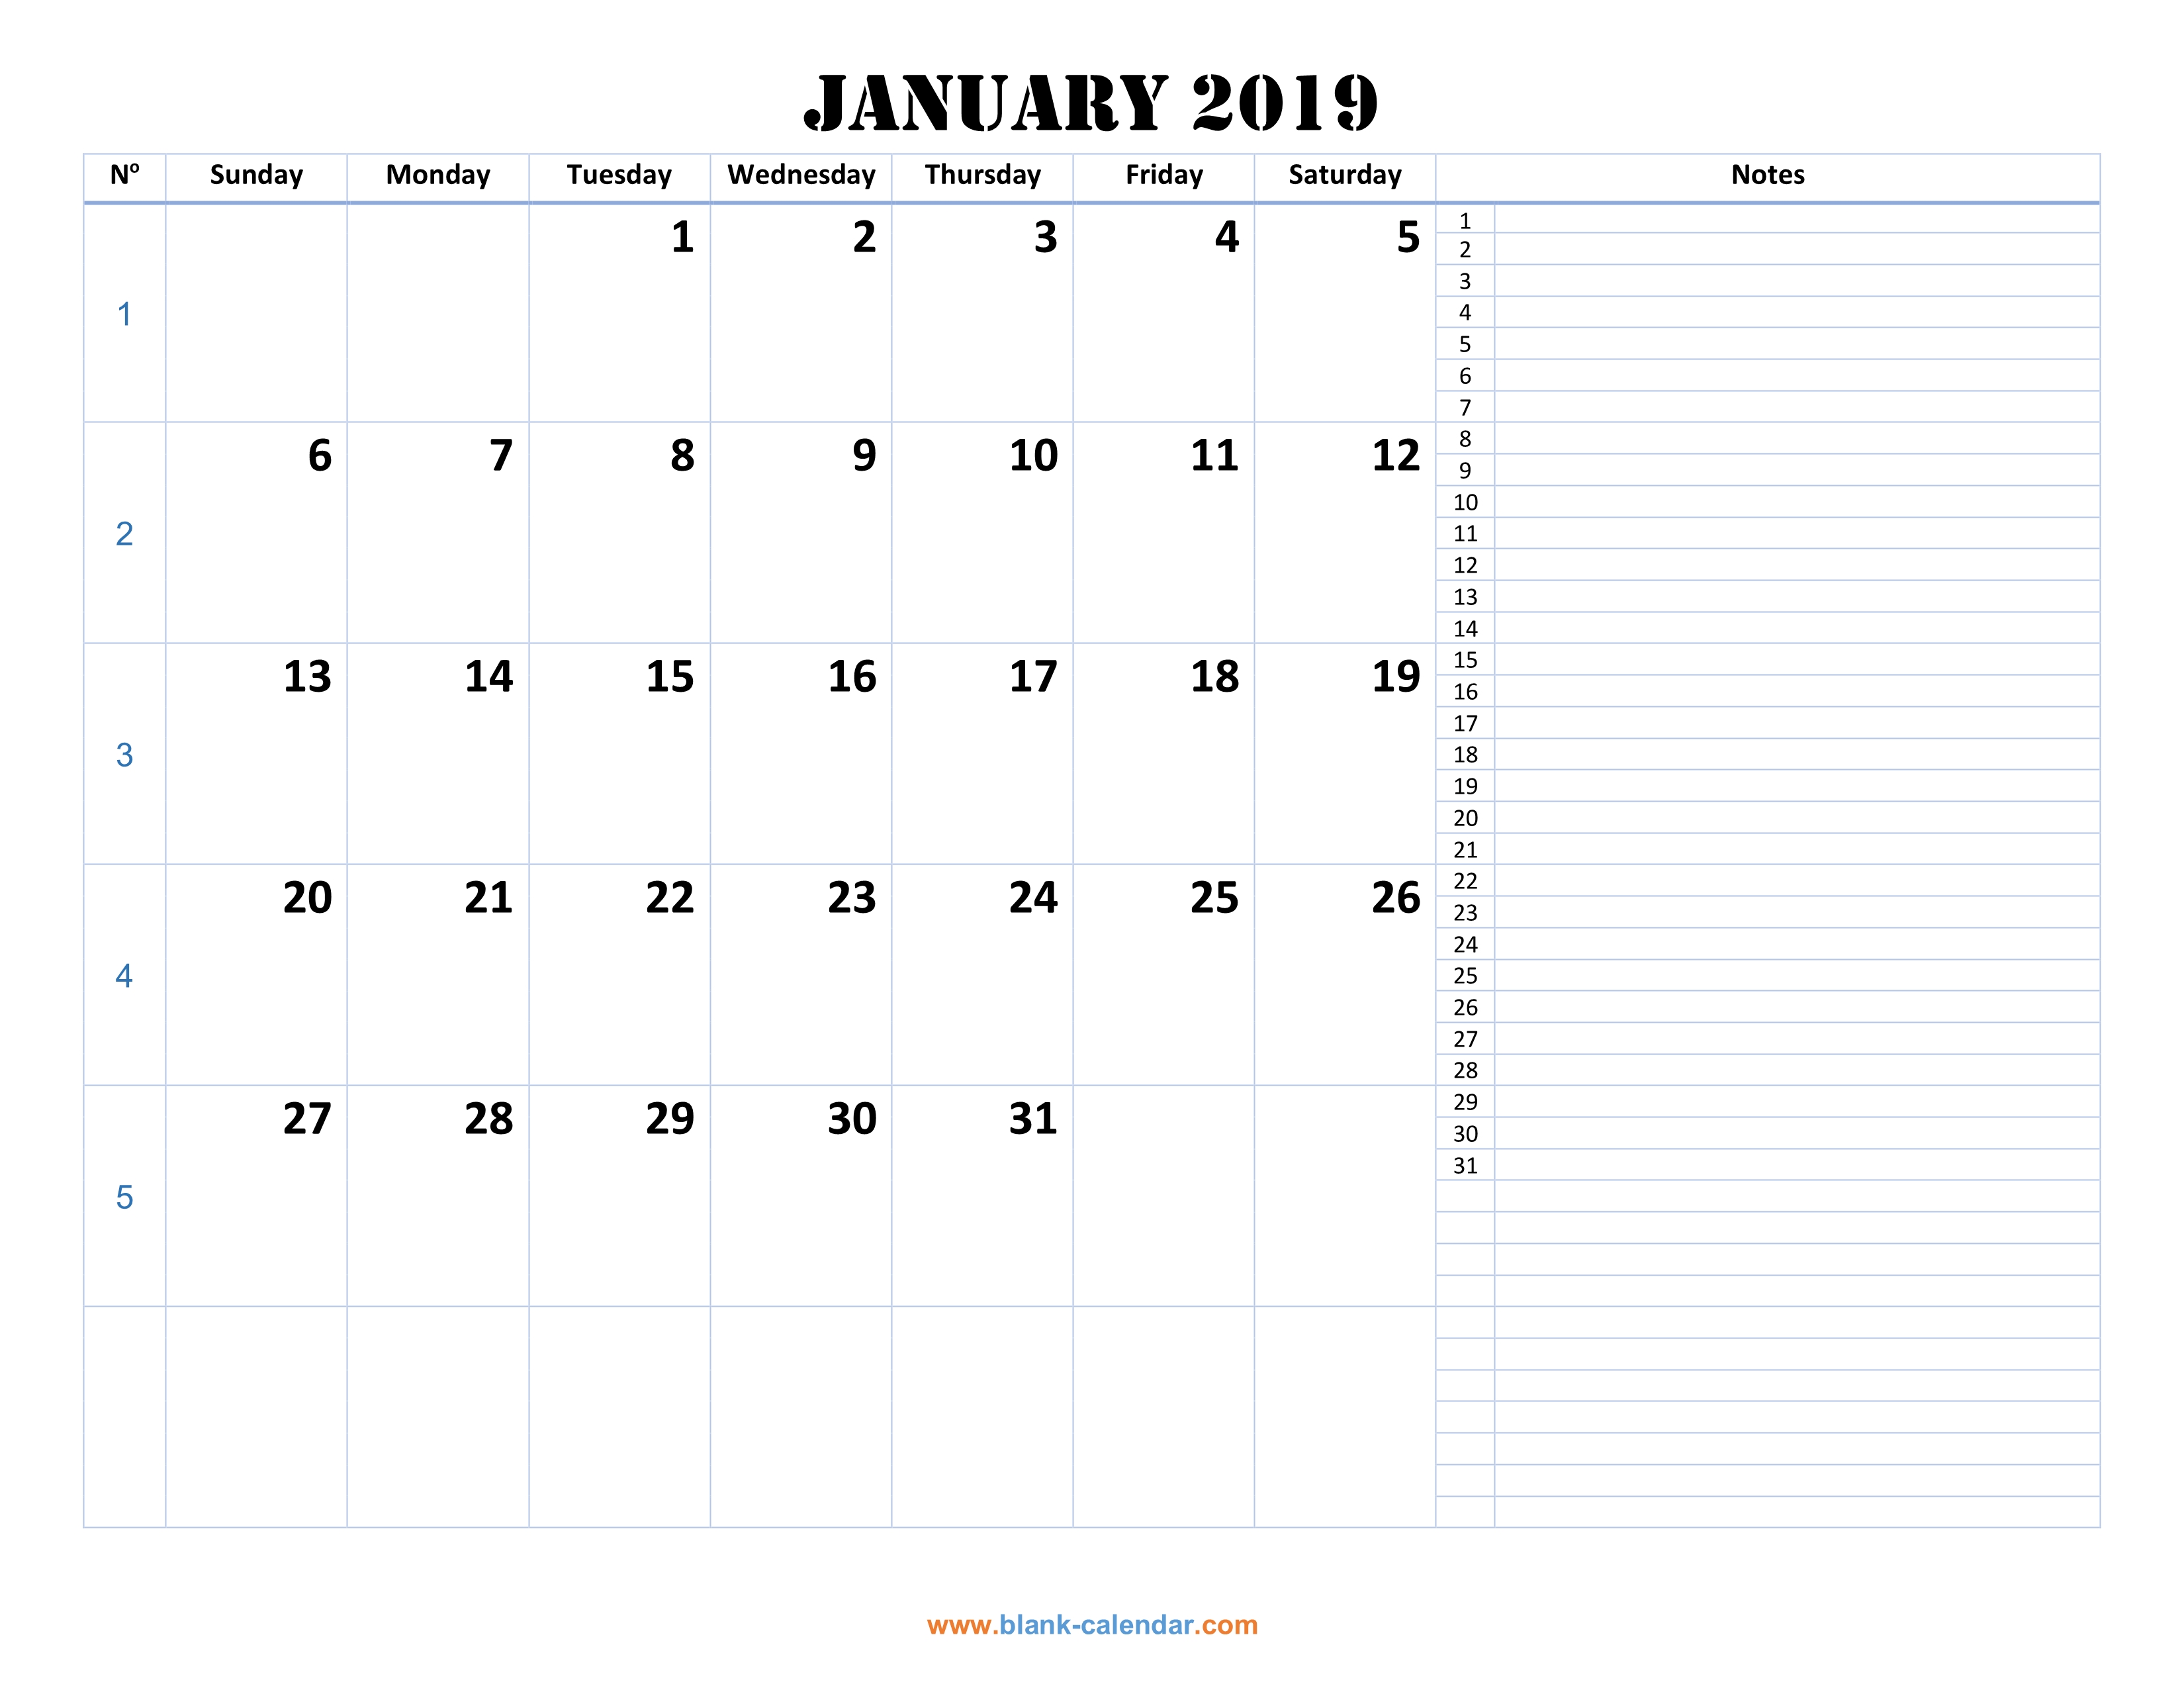 Calendar Template With Notes 2019